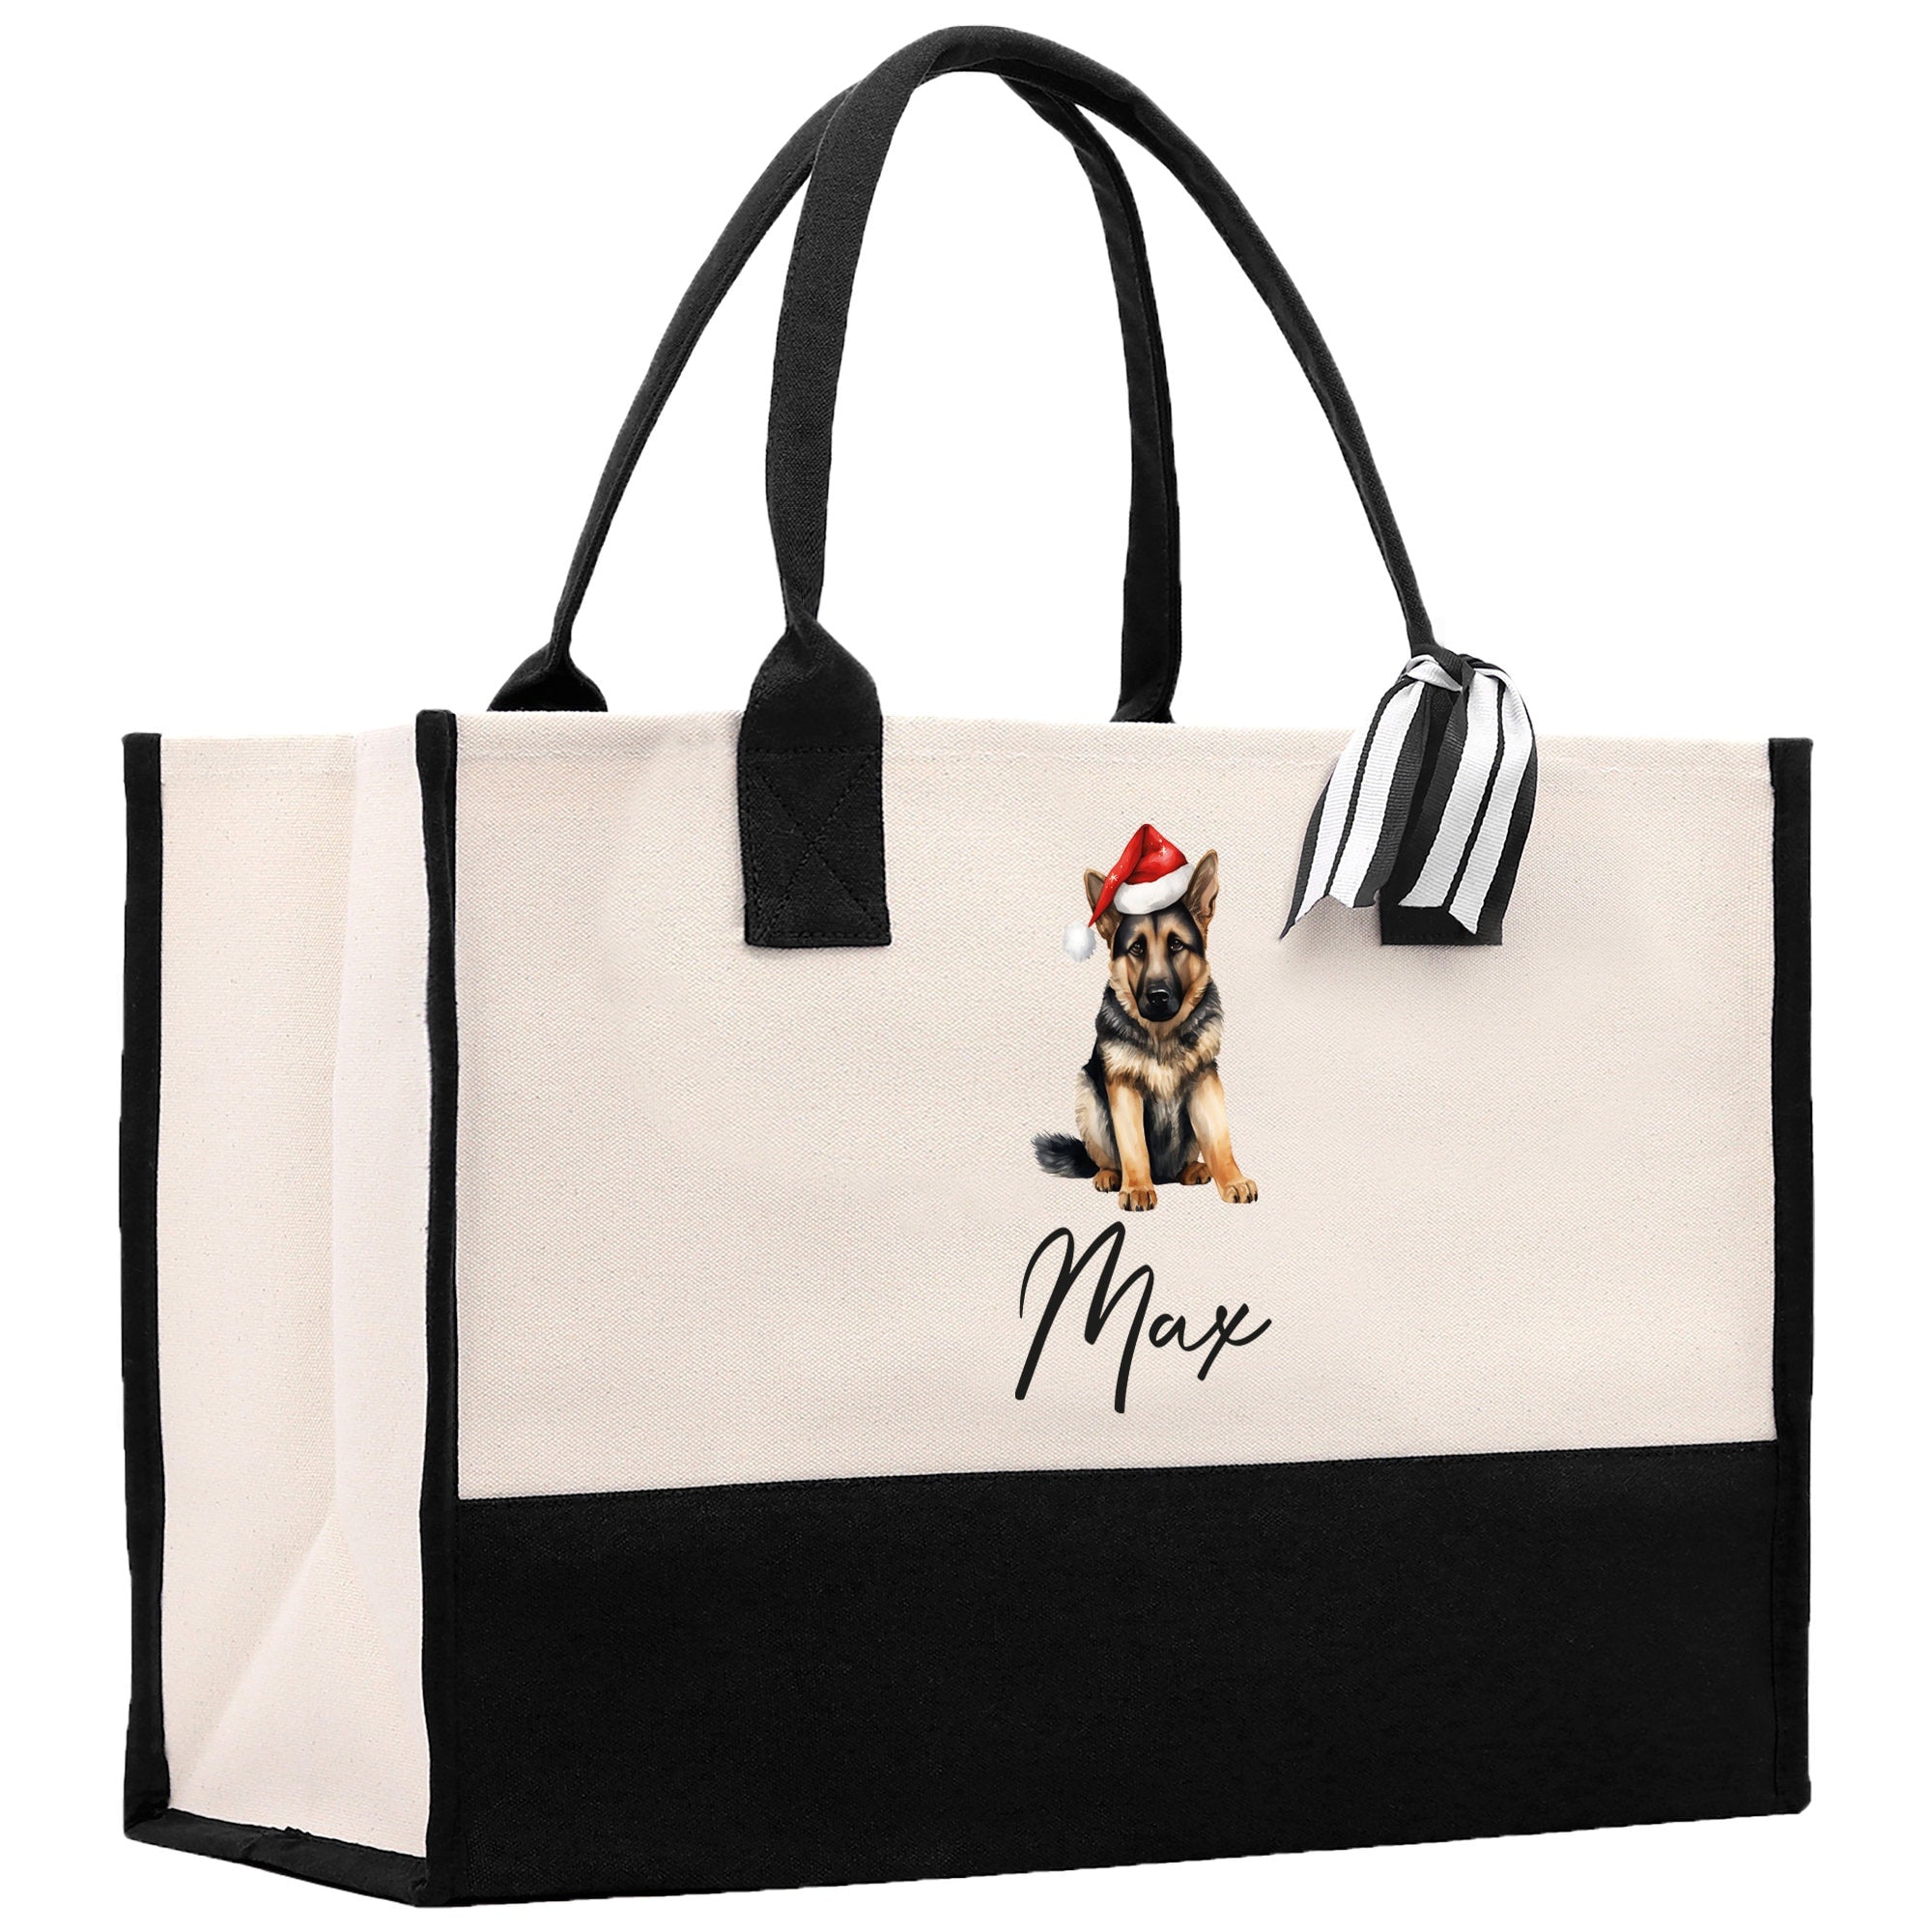 a black and white bag with a german shepard dog on it